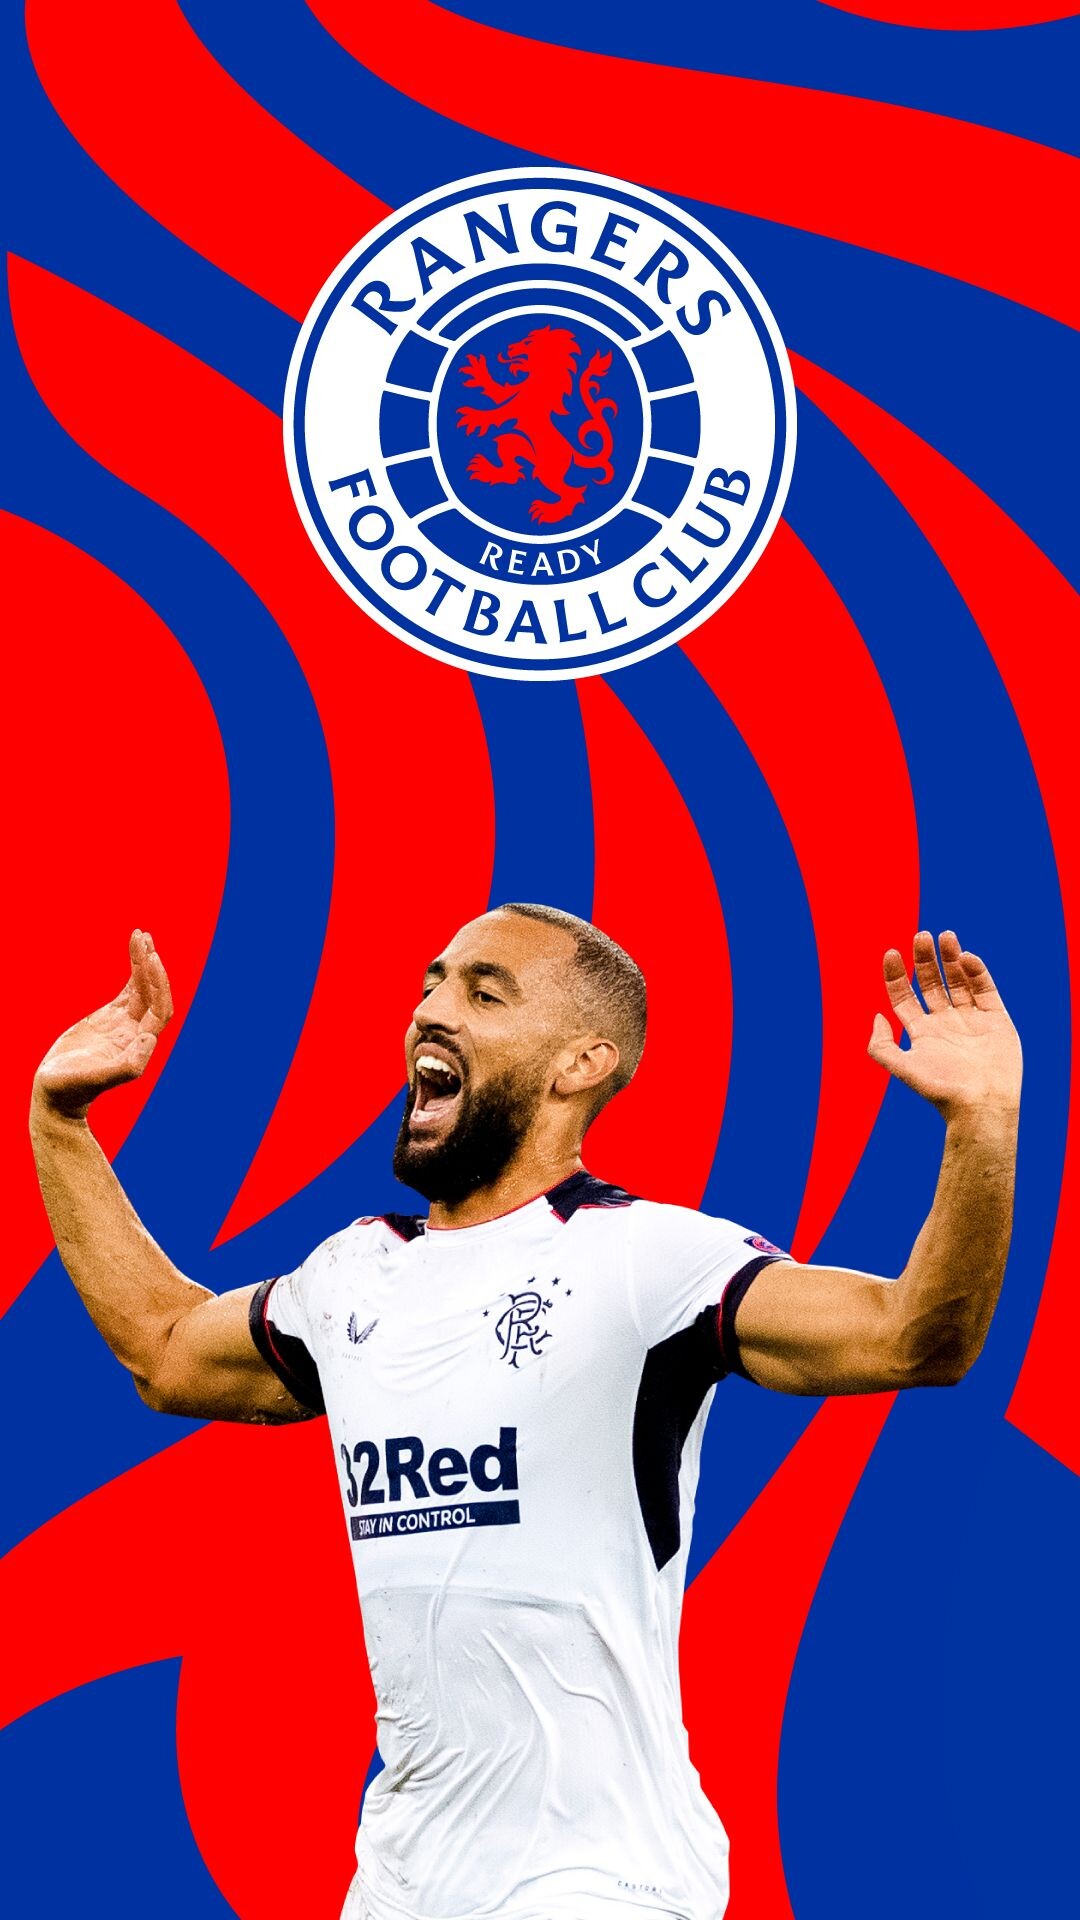 Rangers F.C.: The first club in the world to win more than fifty national league titles. 1080x1920 Full HD Background.